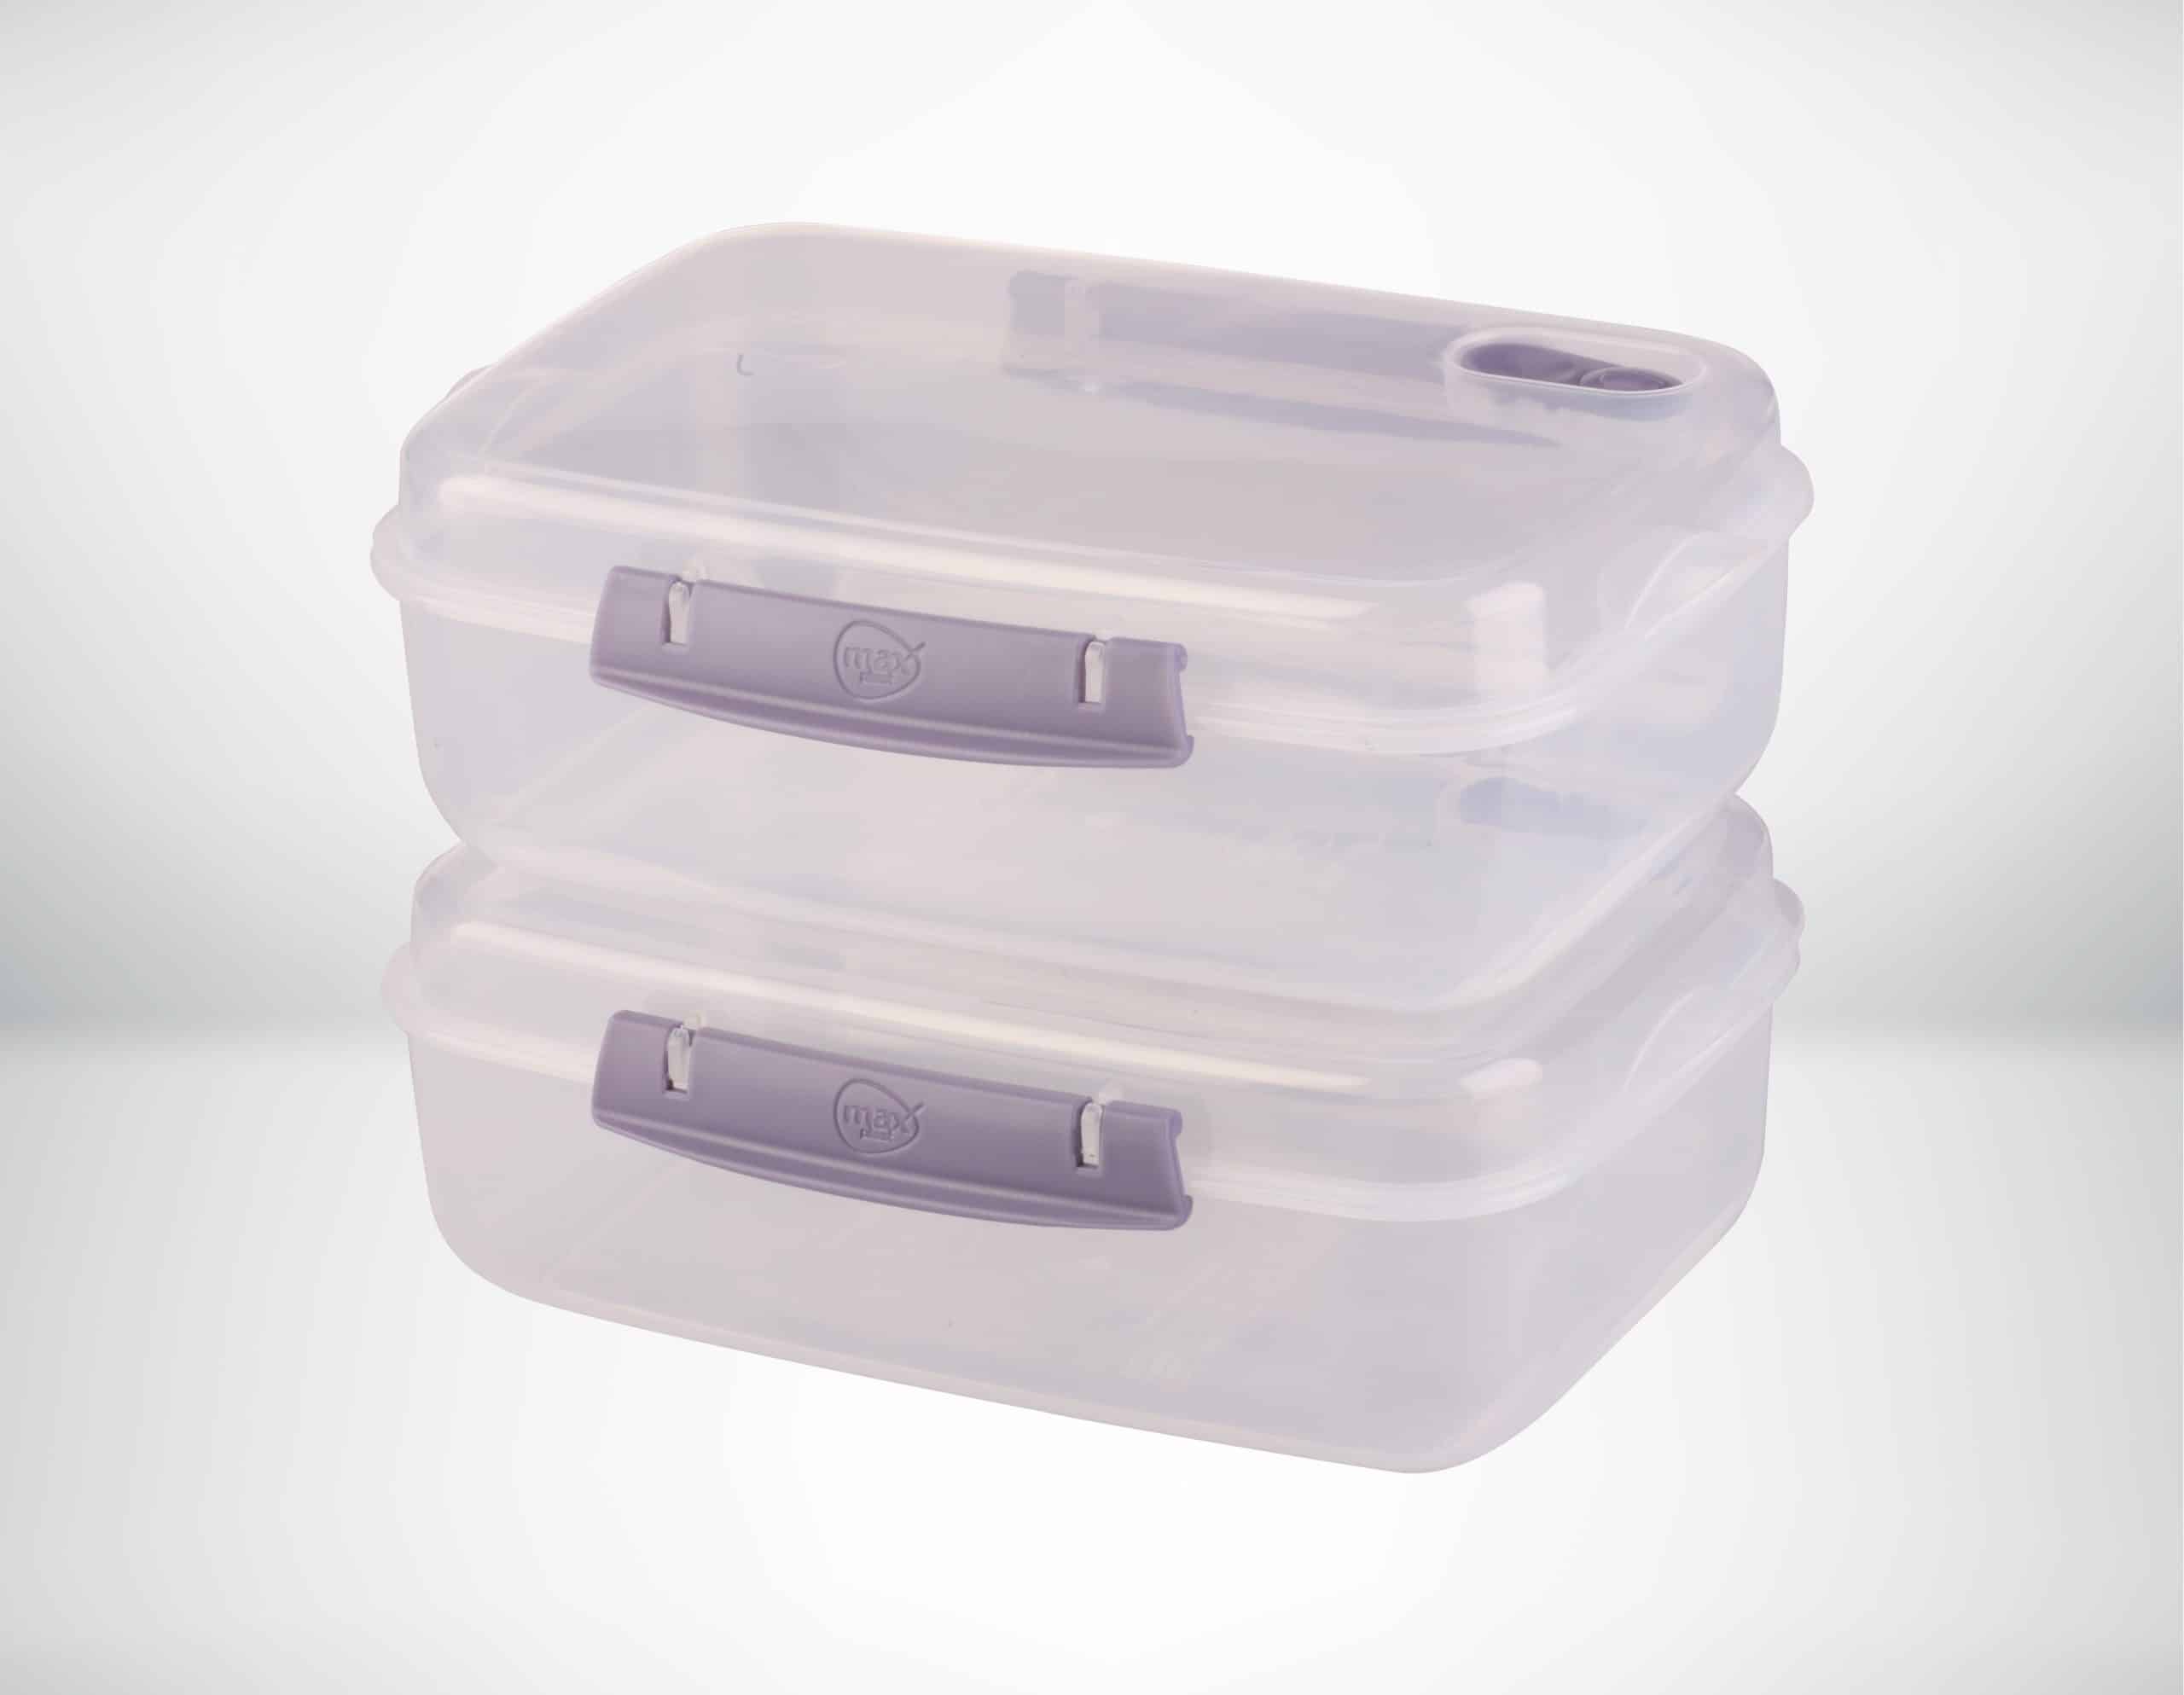 20-100 Meal Prep Food Containers Storage with Lids Reusable